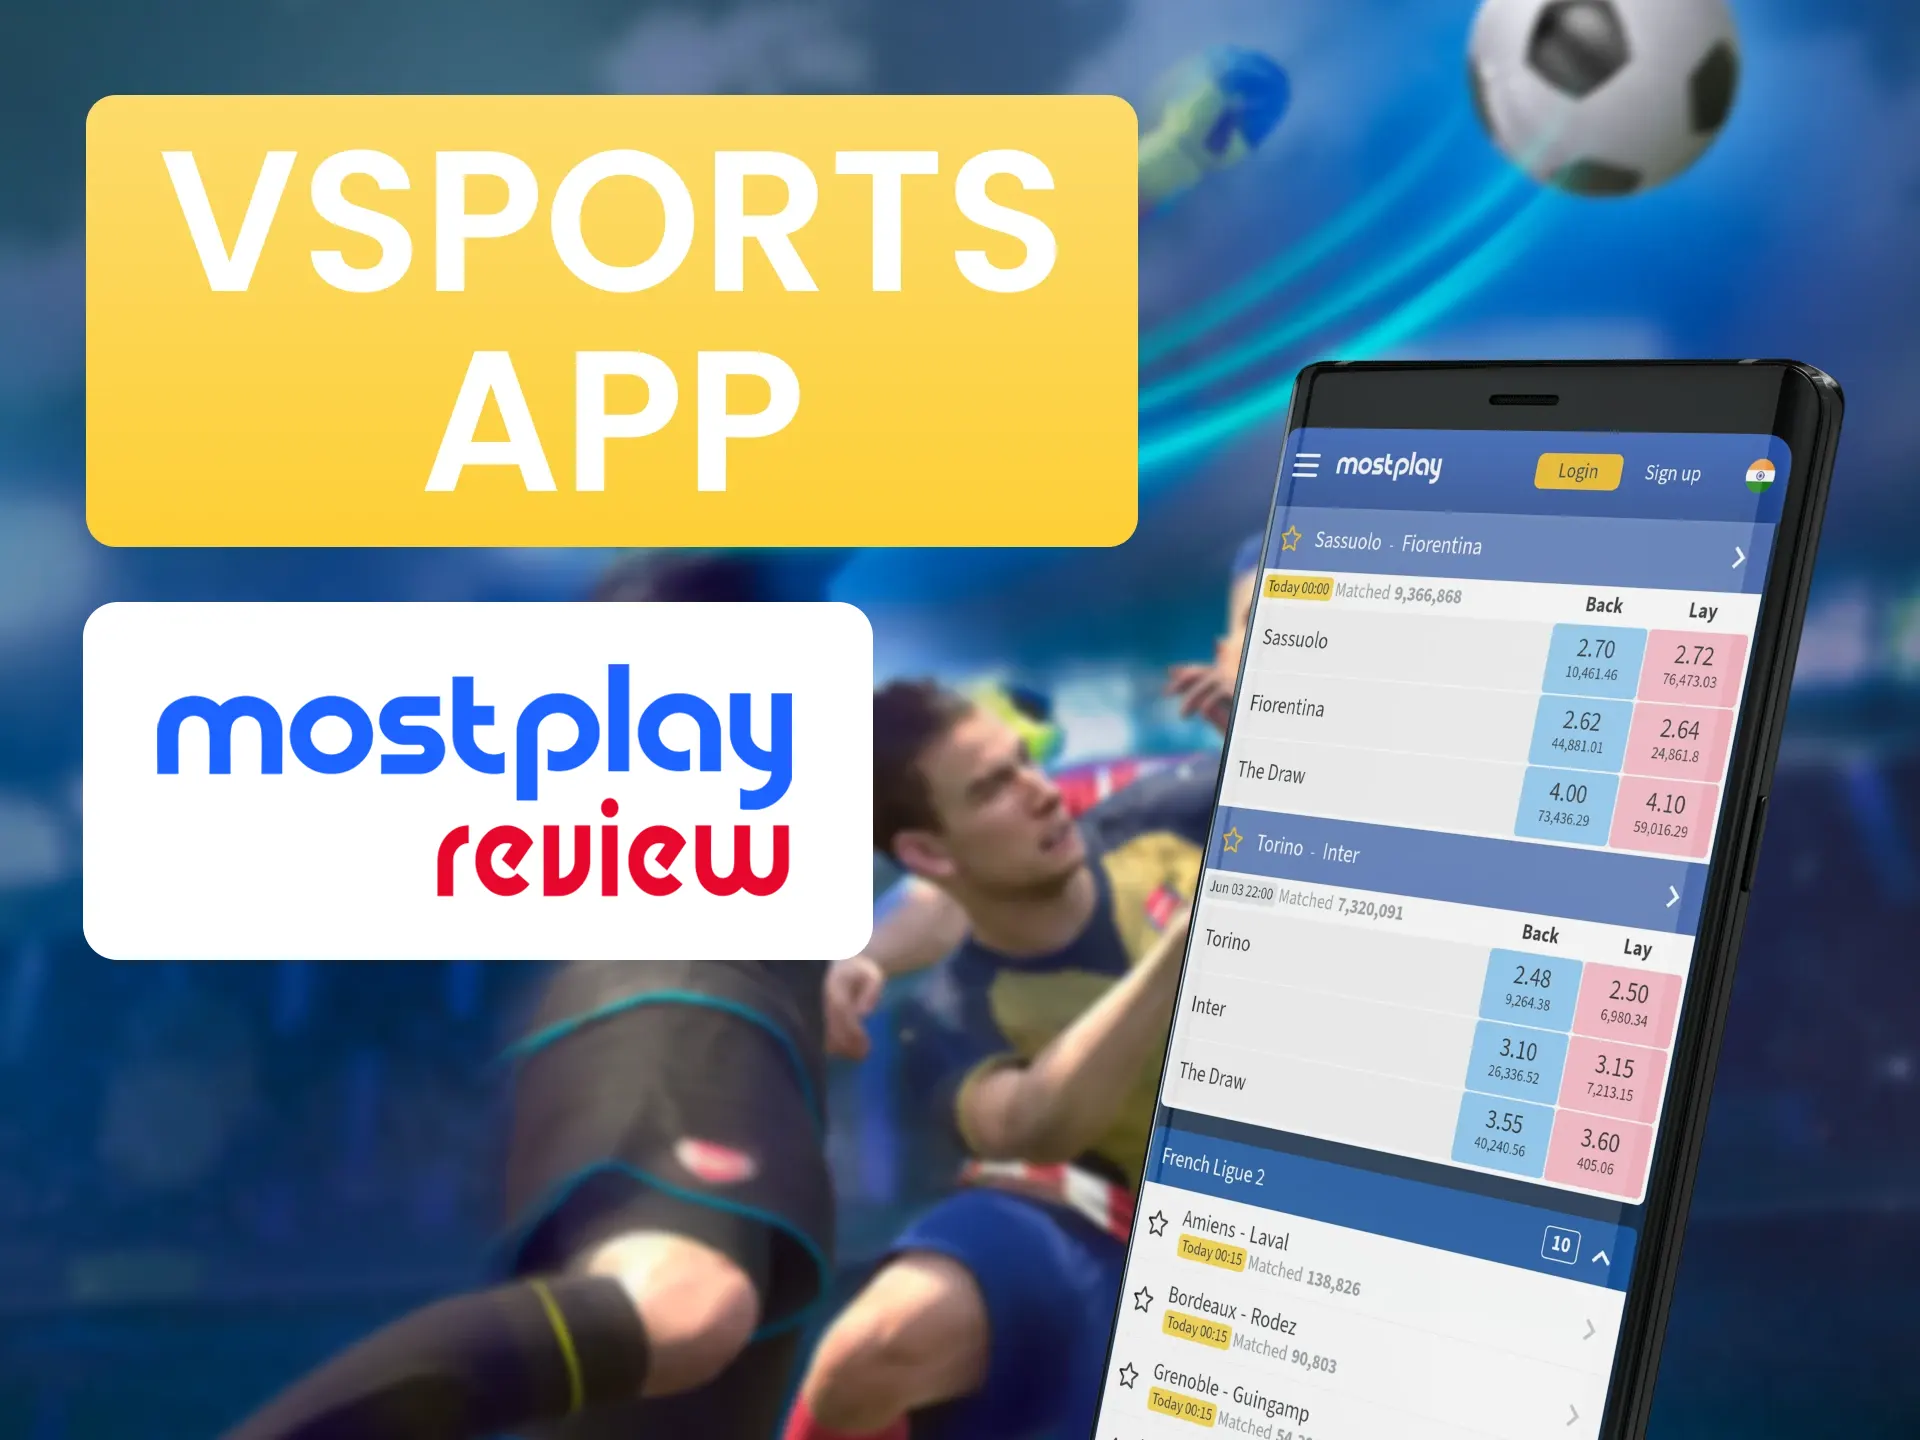 Make bets on virtual sports using the special Mostplay app.